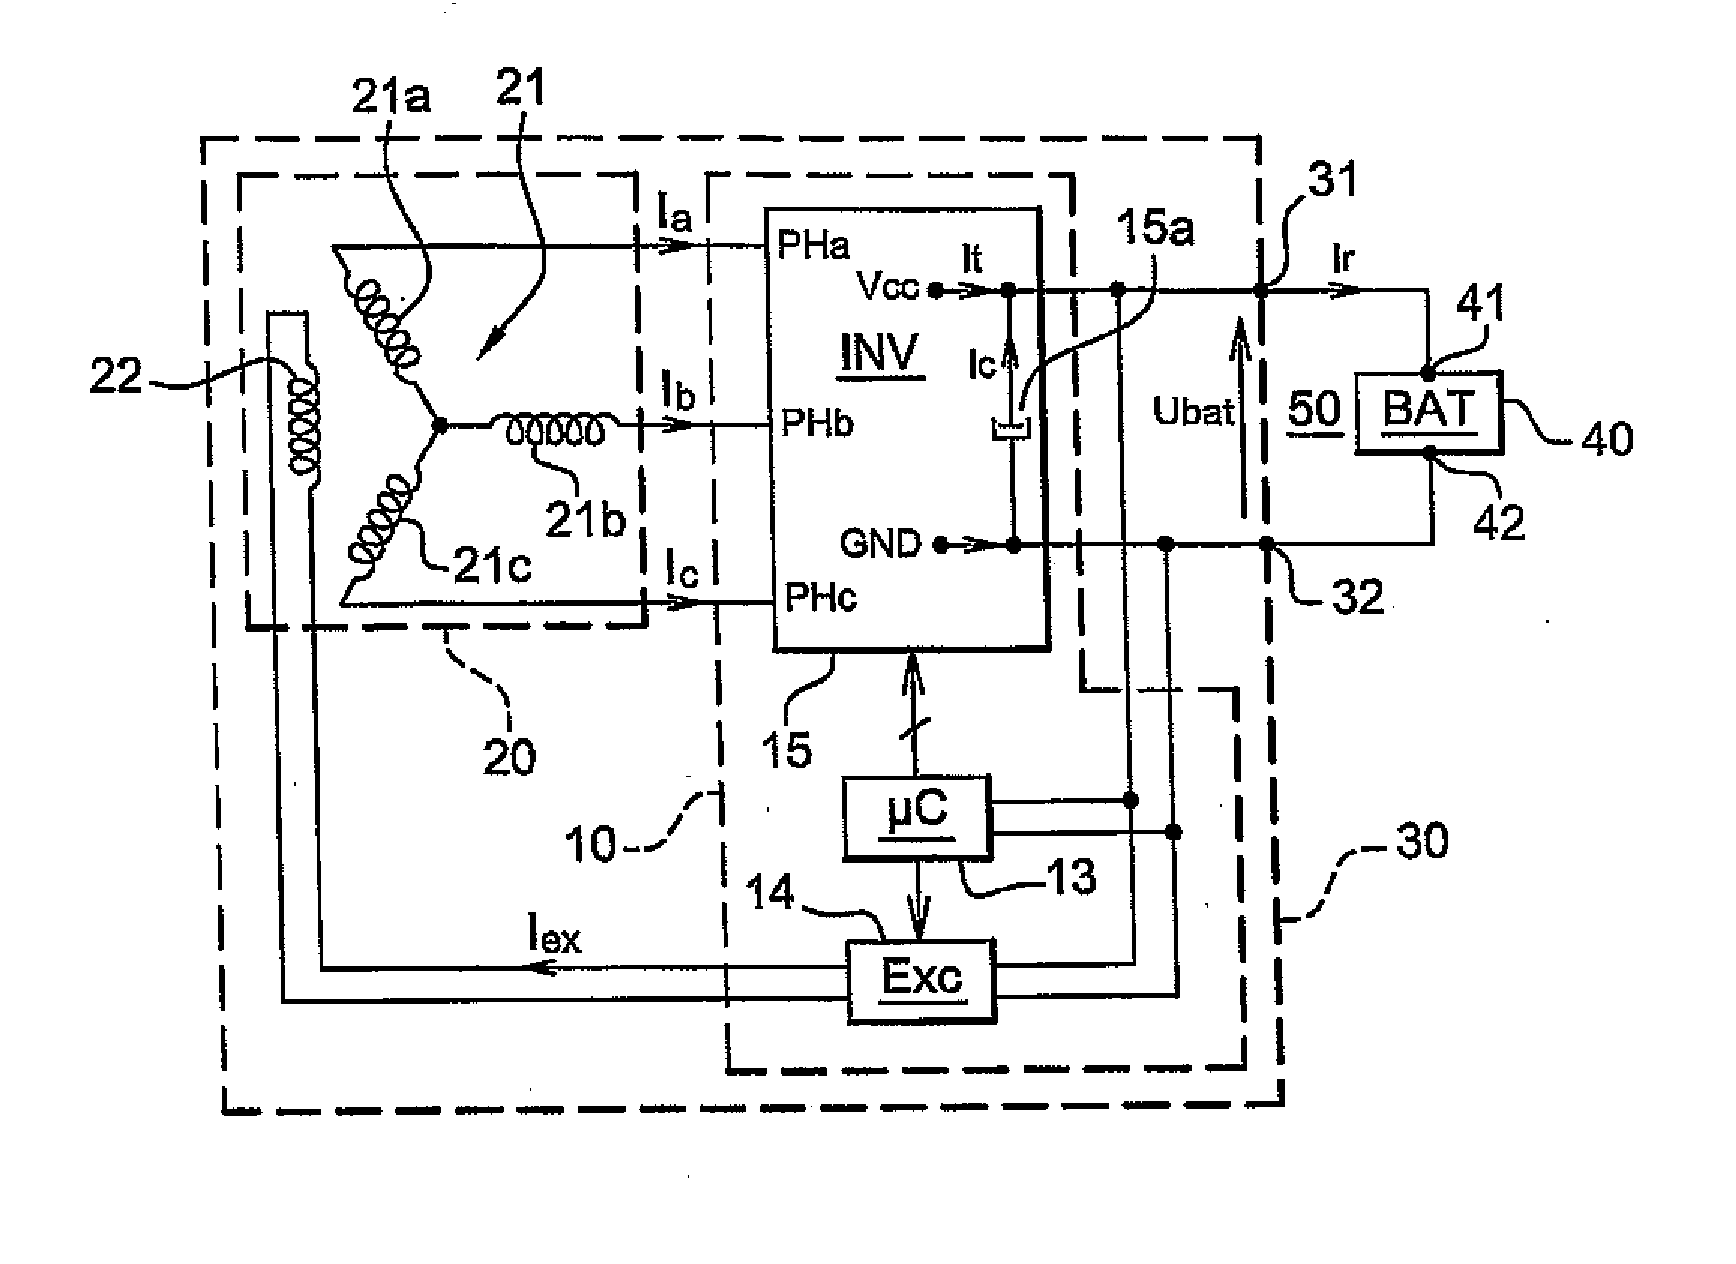 Control And Power Module For A Rotating Electrical Machine